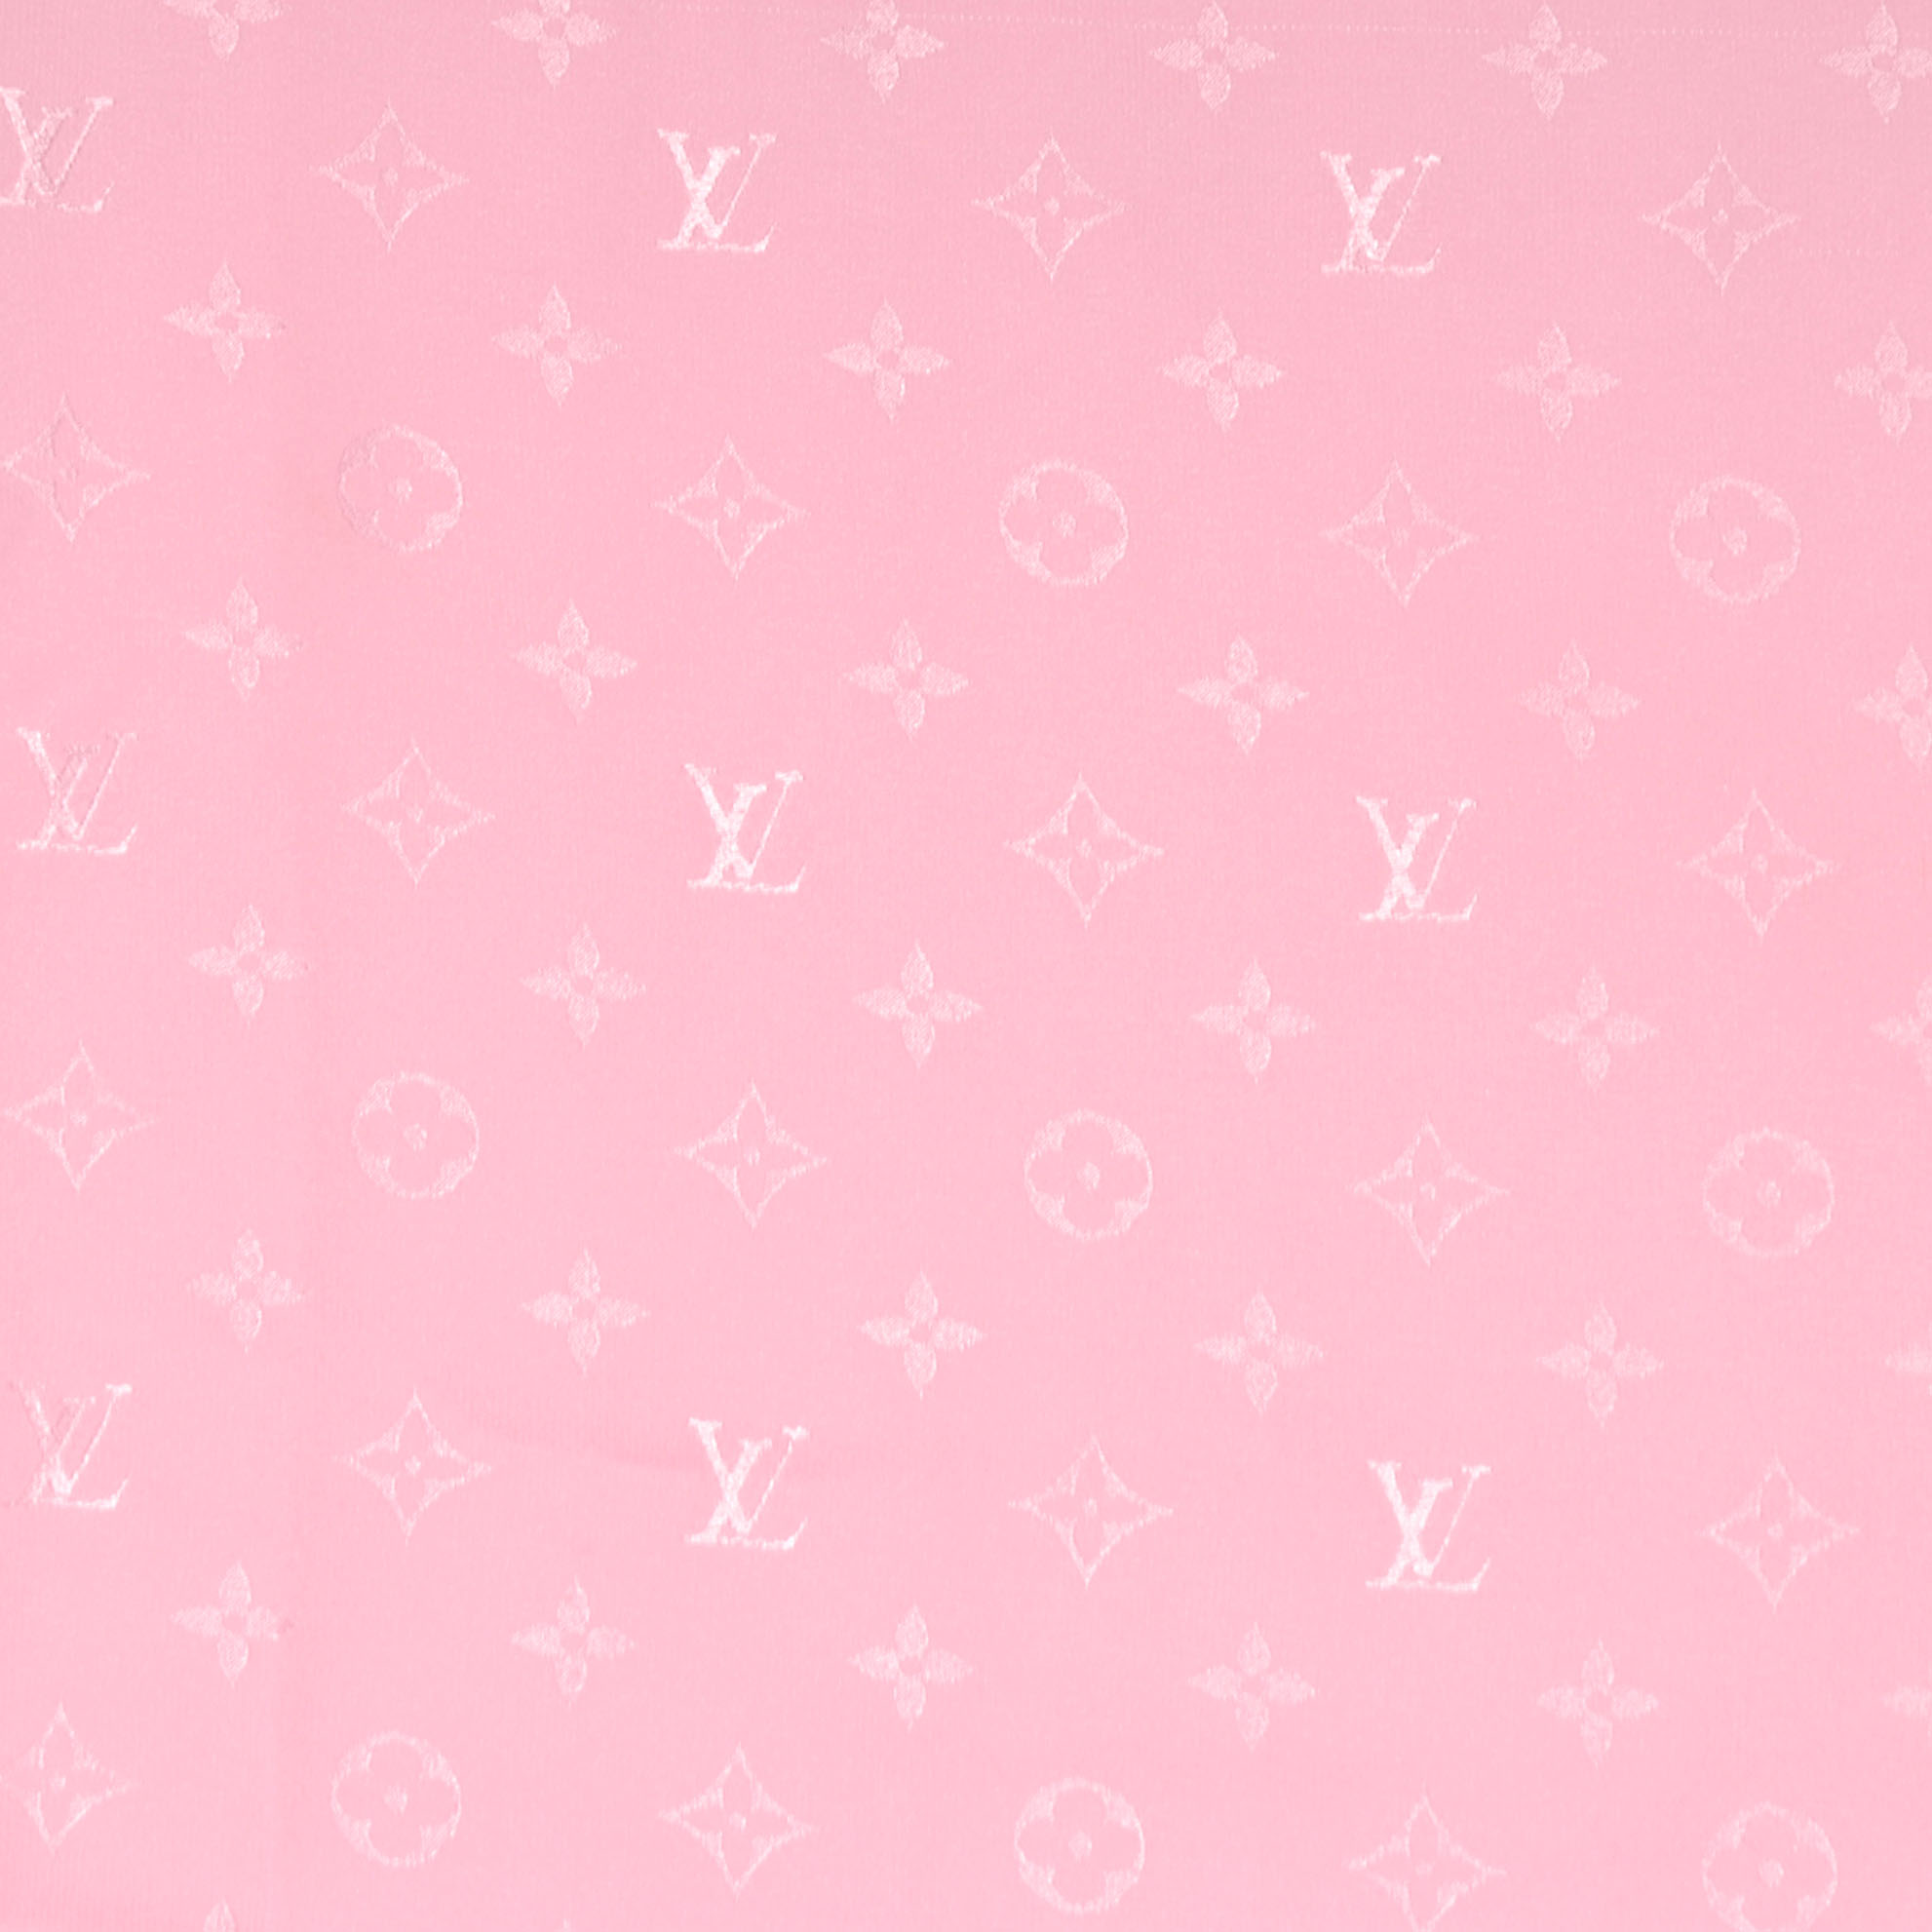 Louis Vuitton Wallpaper Discover more Background, cool, Iphone, Logo, Pink  wallpapers. h…